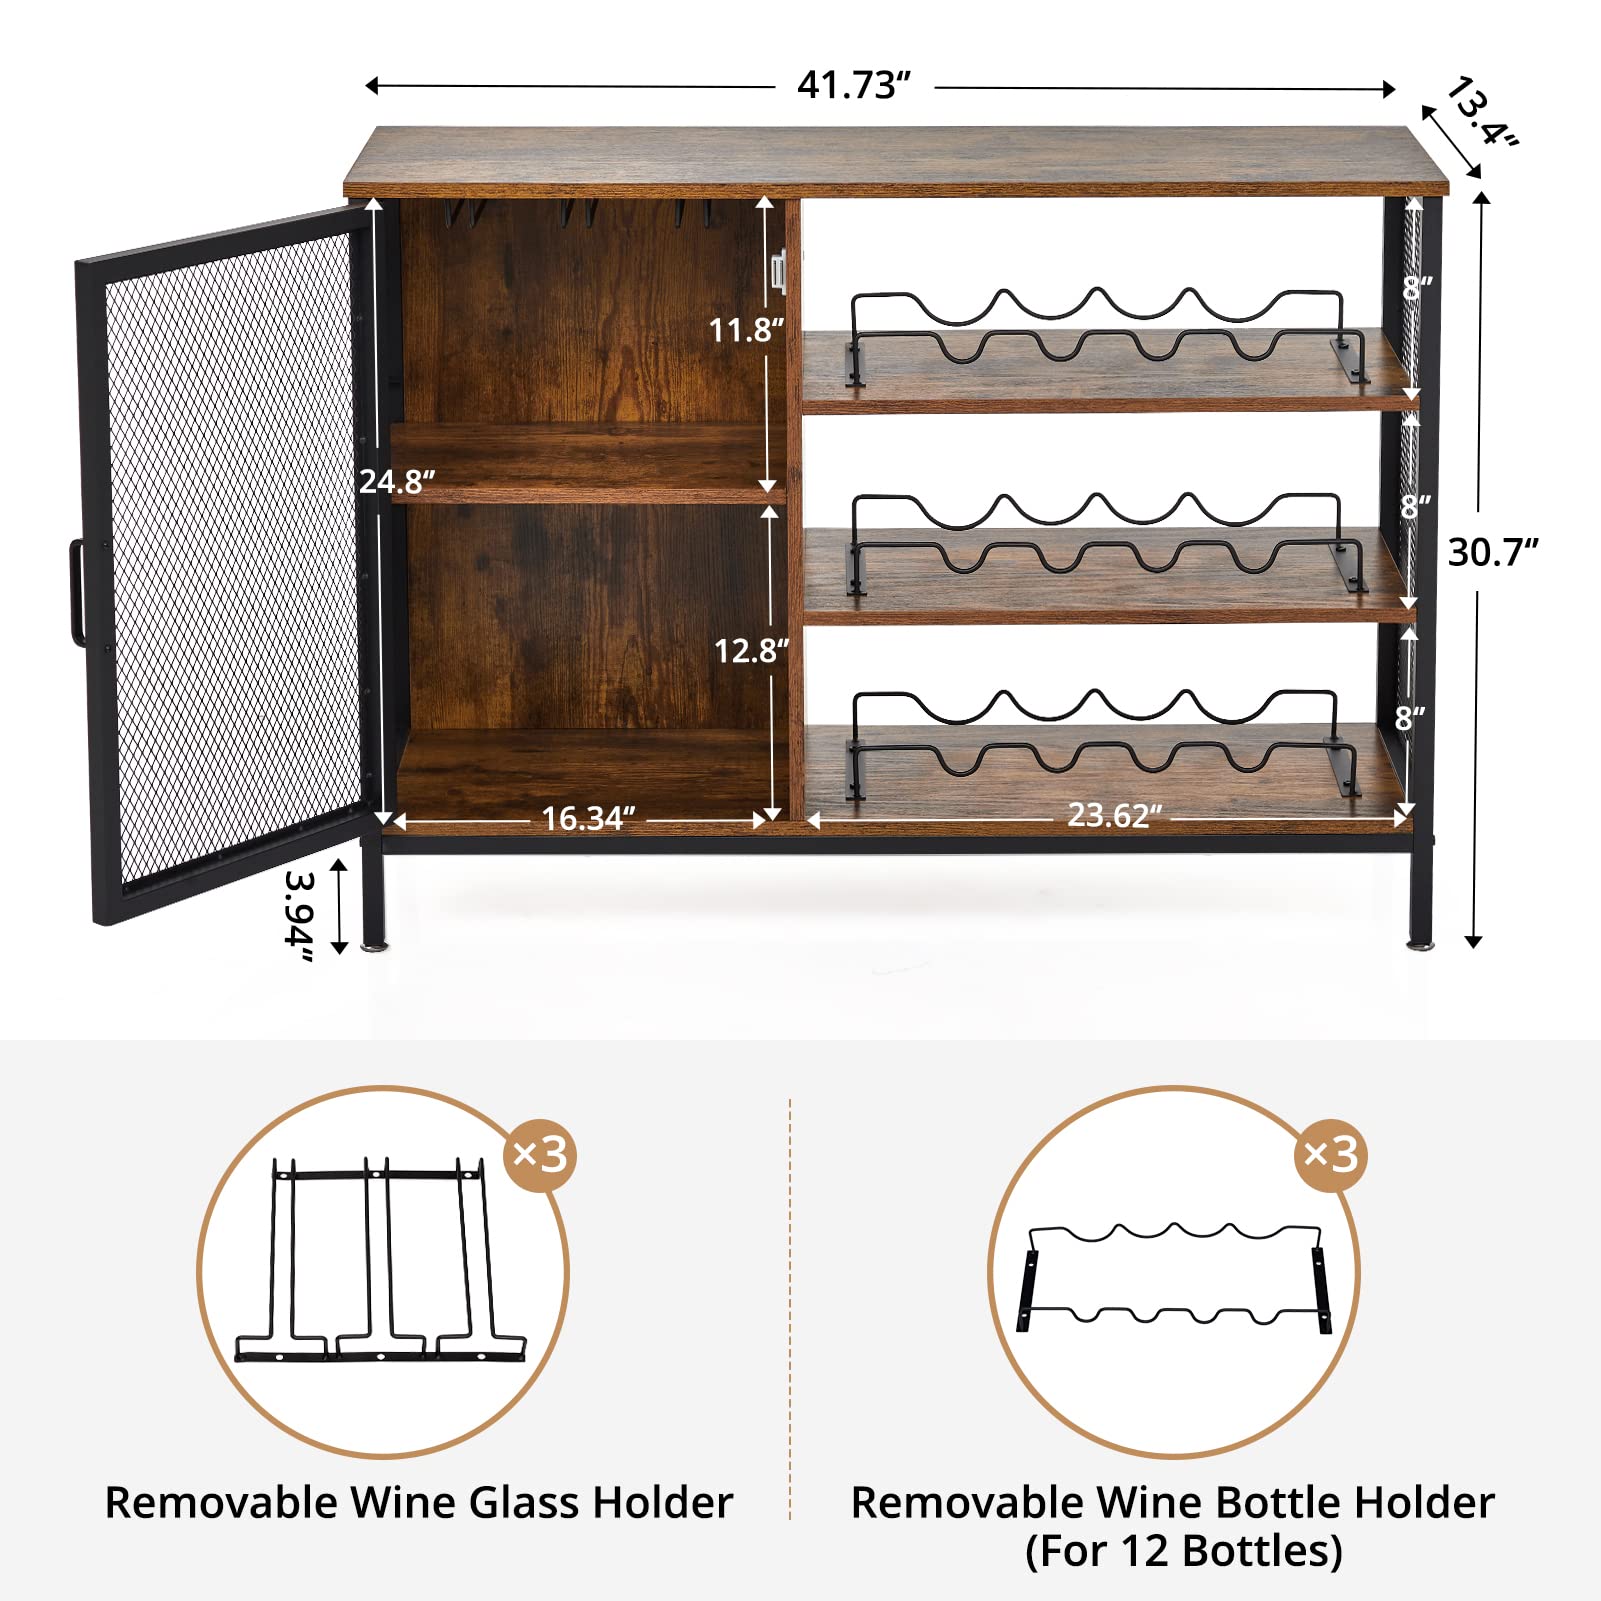 Fashionwu 42 Inches Wine Cabinet with Storage Shelf, Industrial Bar Cabinet with Removable Wine Rack and Glass Holder, Wood Freestanding Wine Rack Cabinet for Liquor and Glasses(Brown)